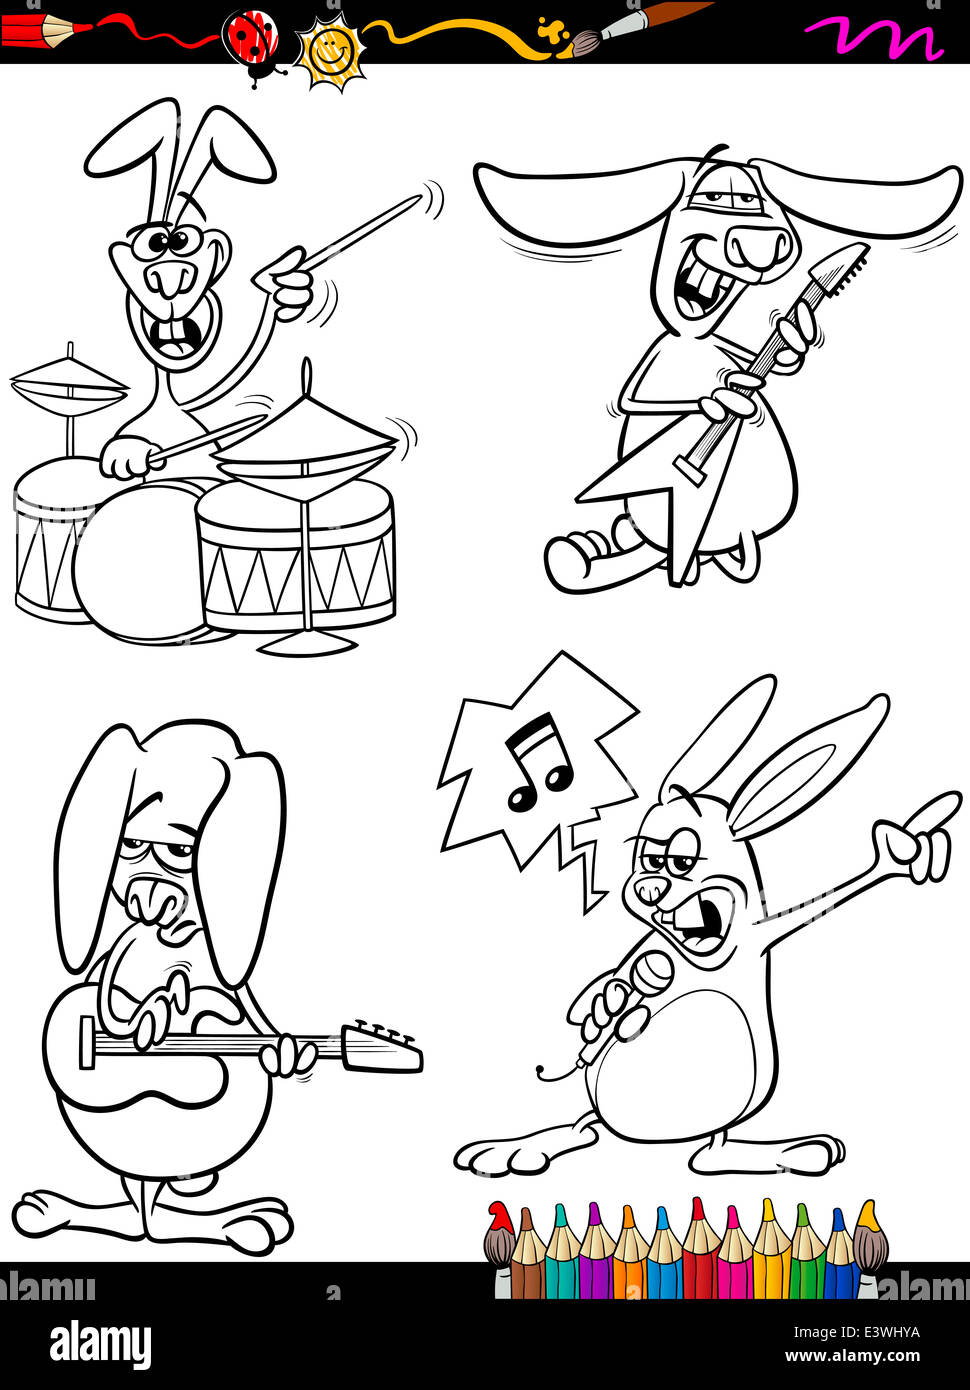 Coloring book or page cartoon illustration of black and white funny rabbits playing rock music and singing for children stock photo